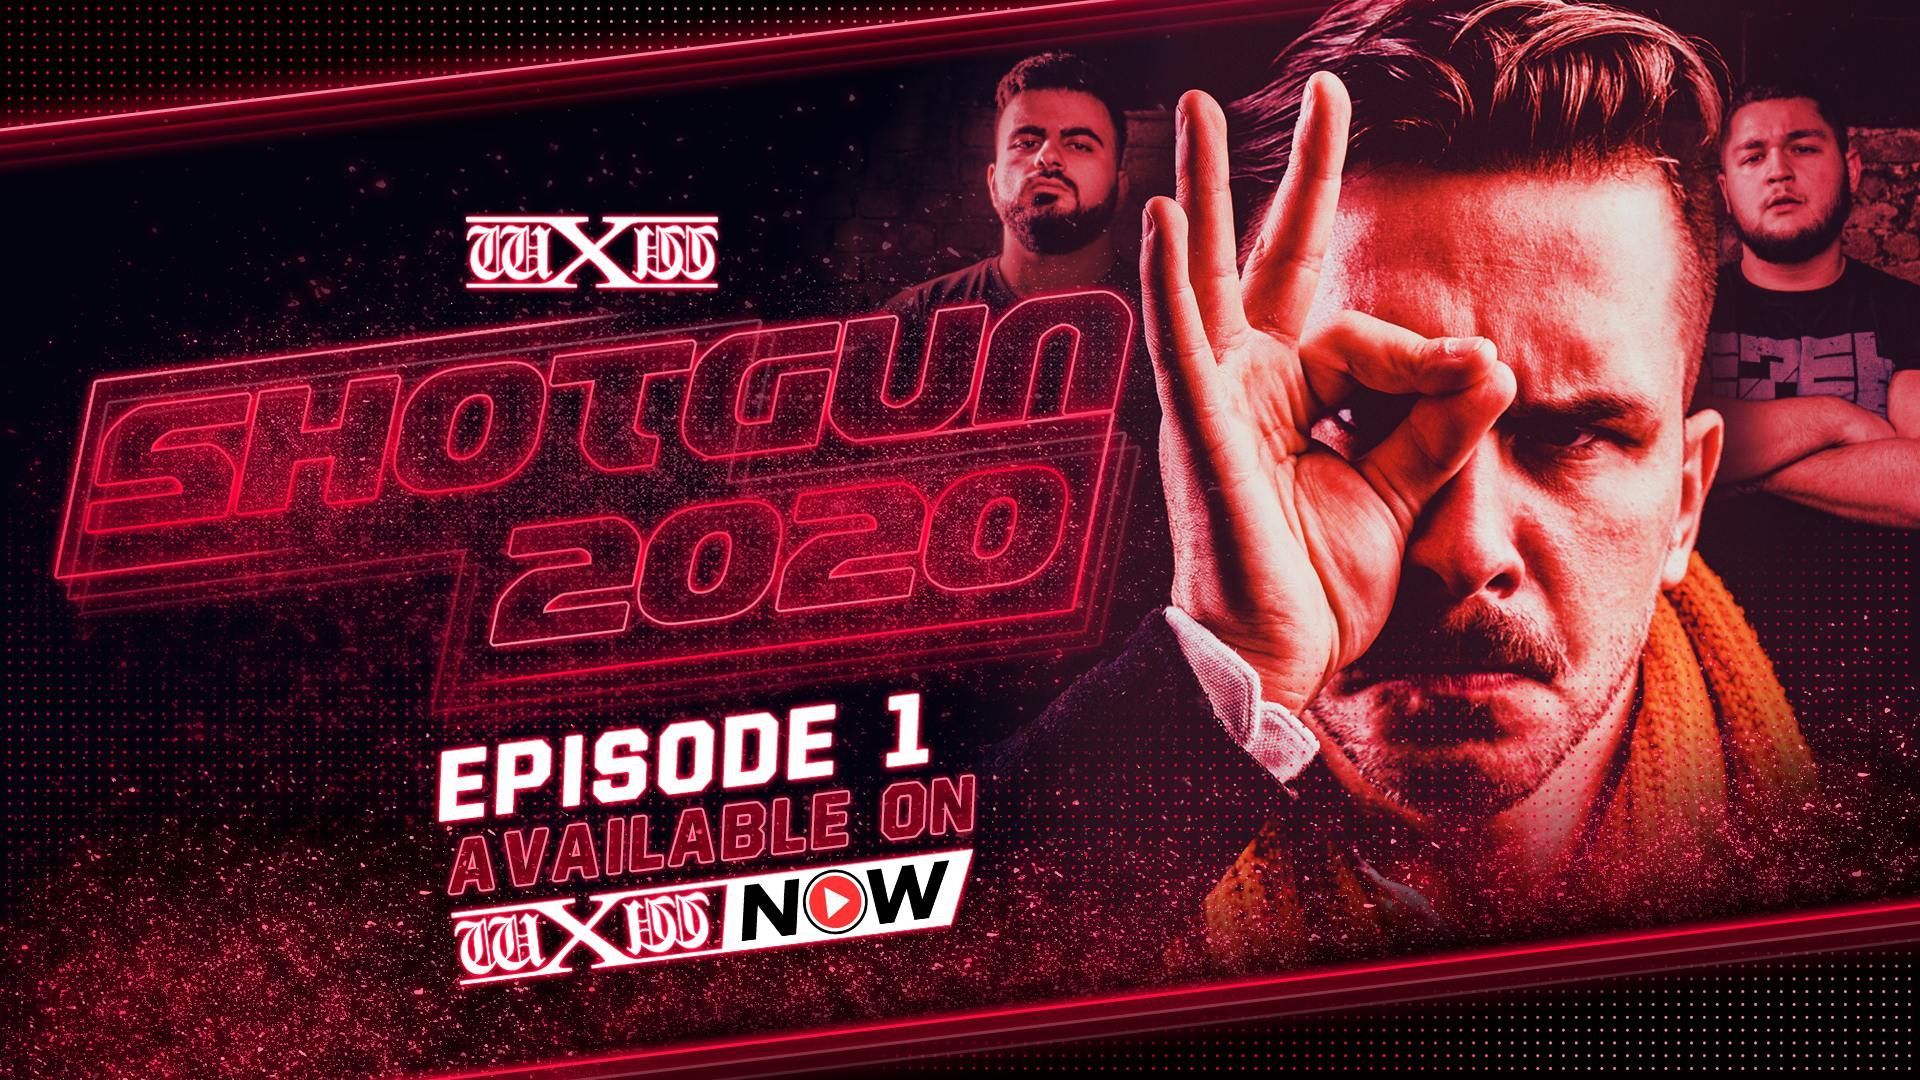 wXw Germany Twitter: "What do you think of @Real_Metehan, Abdul and - EZEL? #wXwShotgun episode 1 is available on https://t.co/z19tqNjzM7 with German English commentary. / Twitter